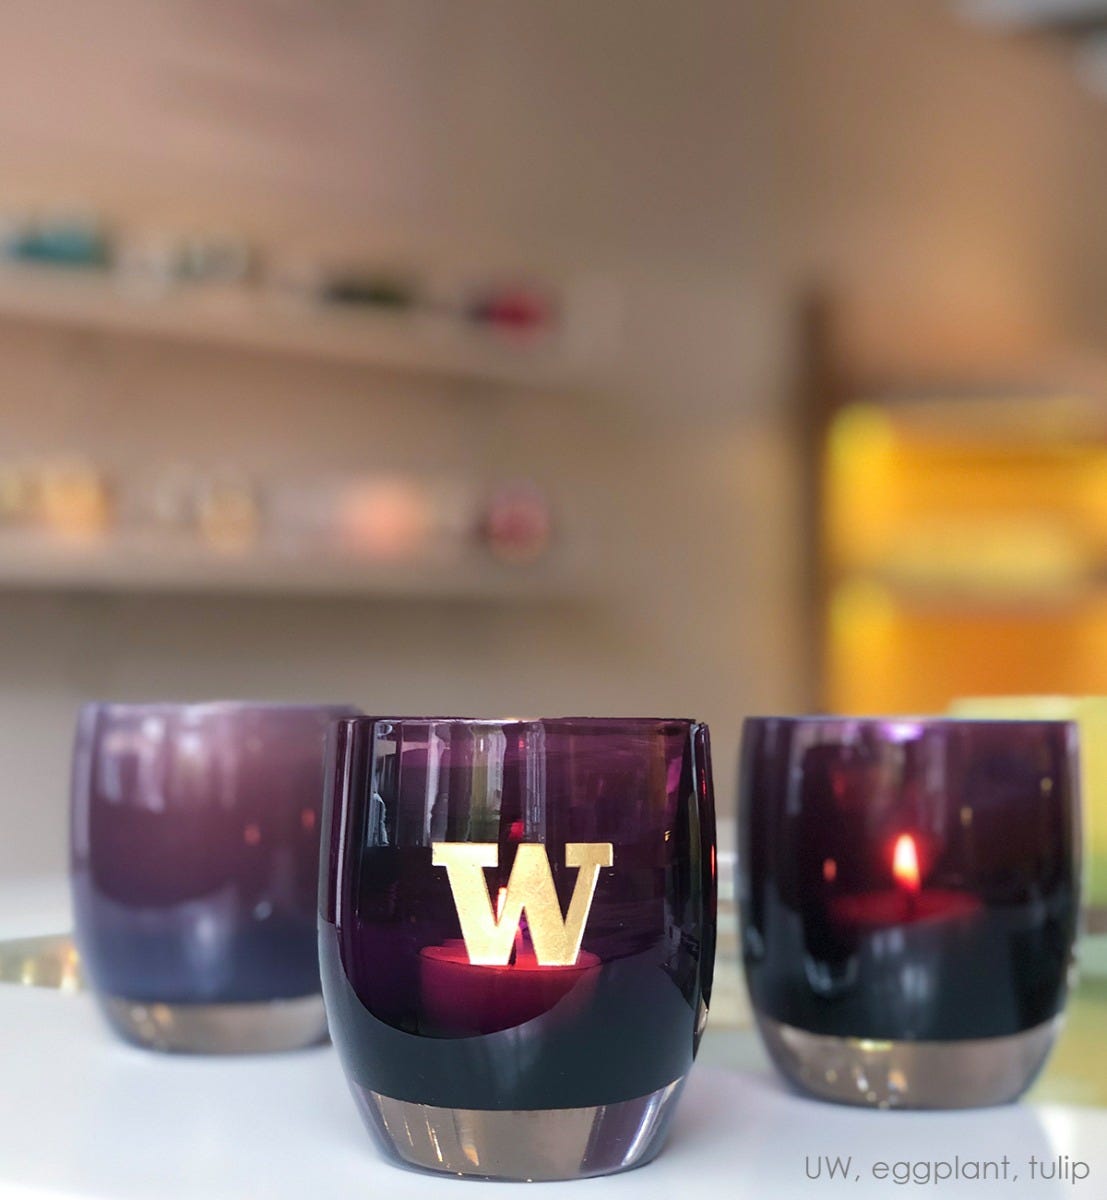 uw, purple with sandblasted university of washington etching hand painted in gold, hand-blown glass votive candle holder. Paired with eggplant and tulip on a white table in a glassybaby retail store.